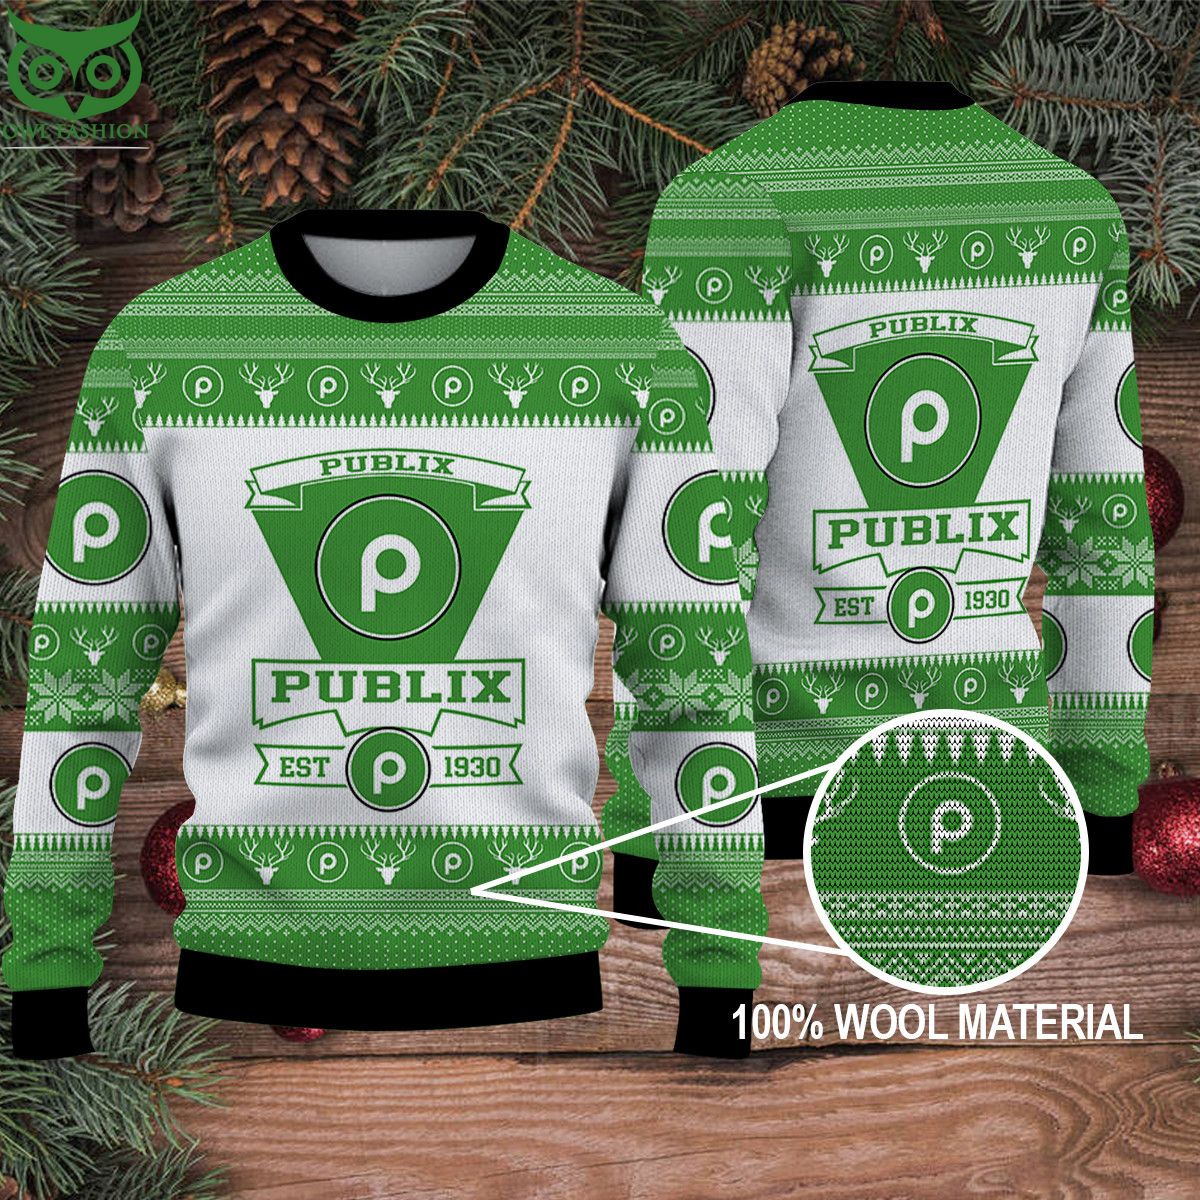 Publix Hot Ugly Sweater You look fresh in nature